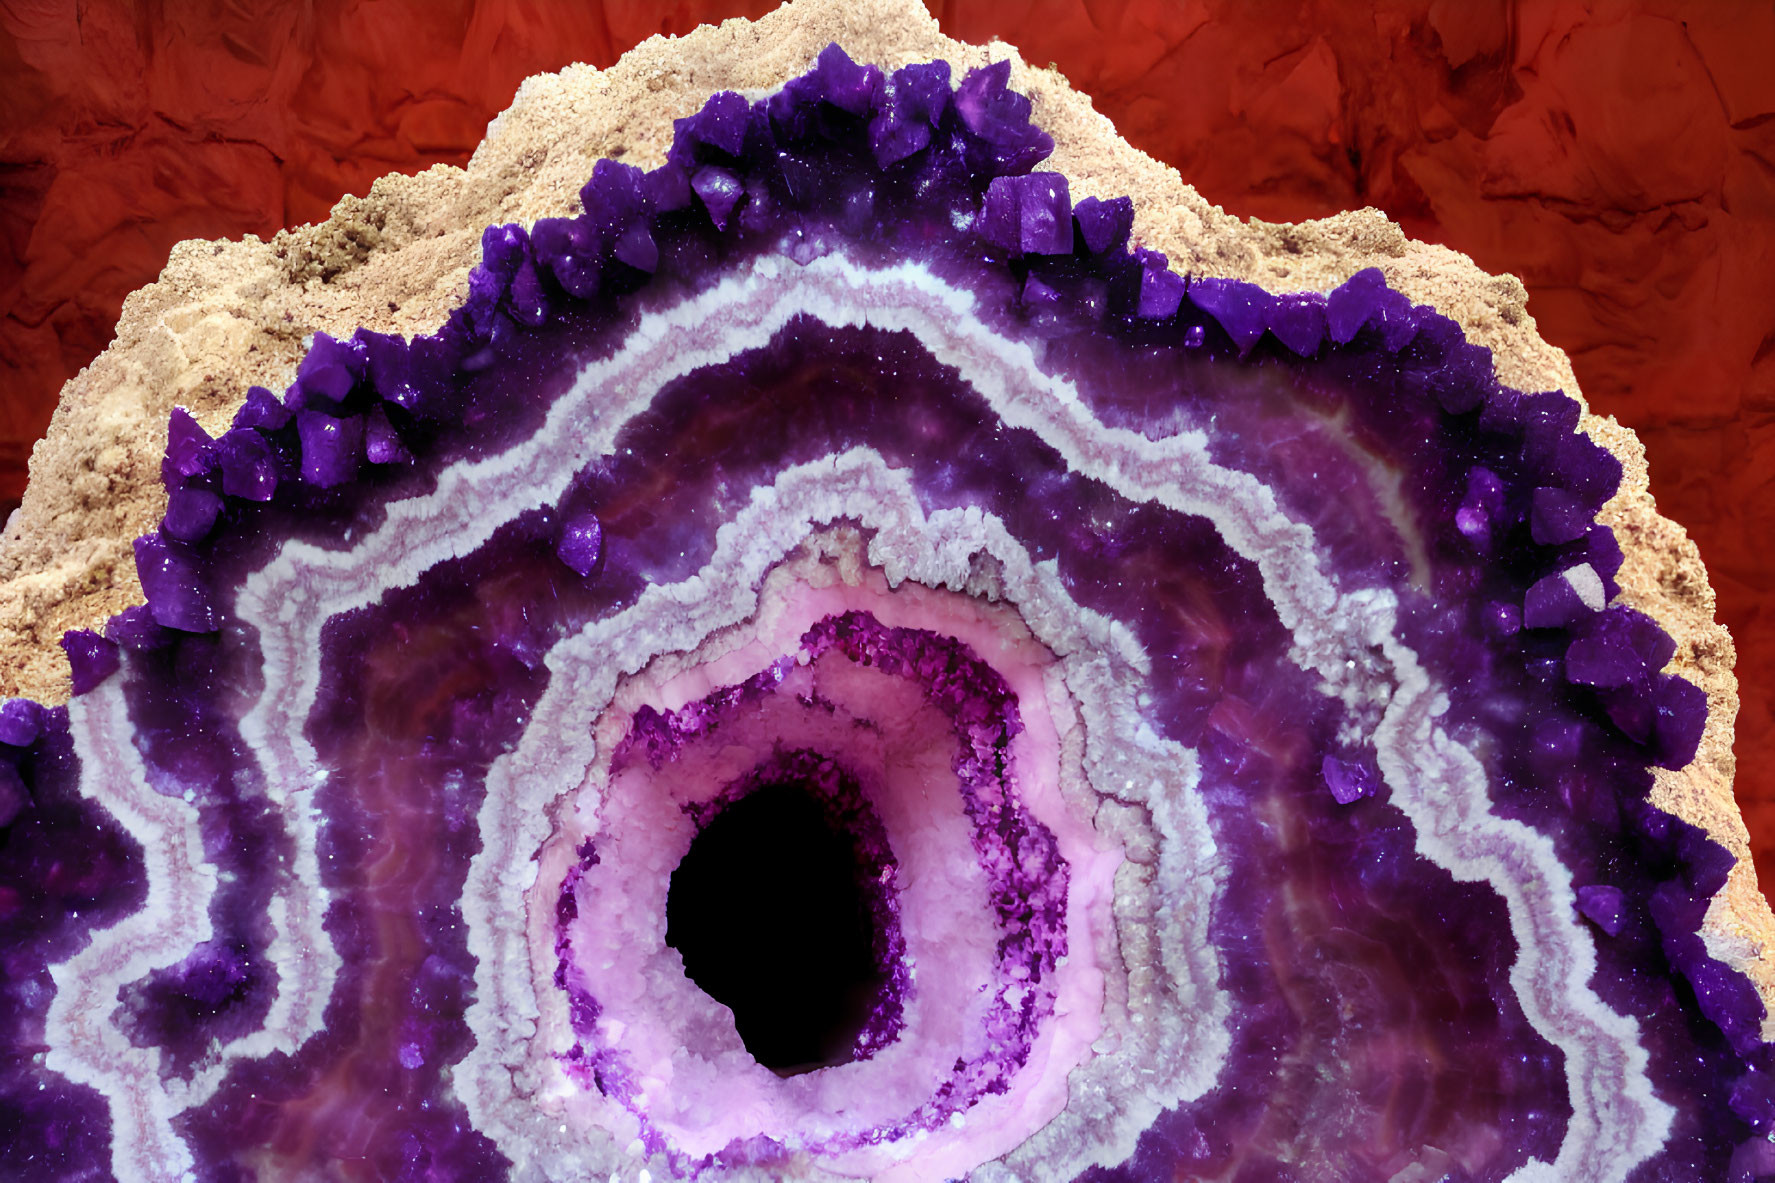 Detailed Macro Shot of Vibrant Geode with Purple Amethyst Crystals